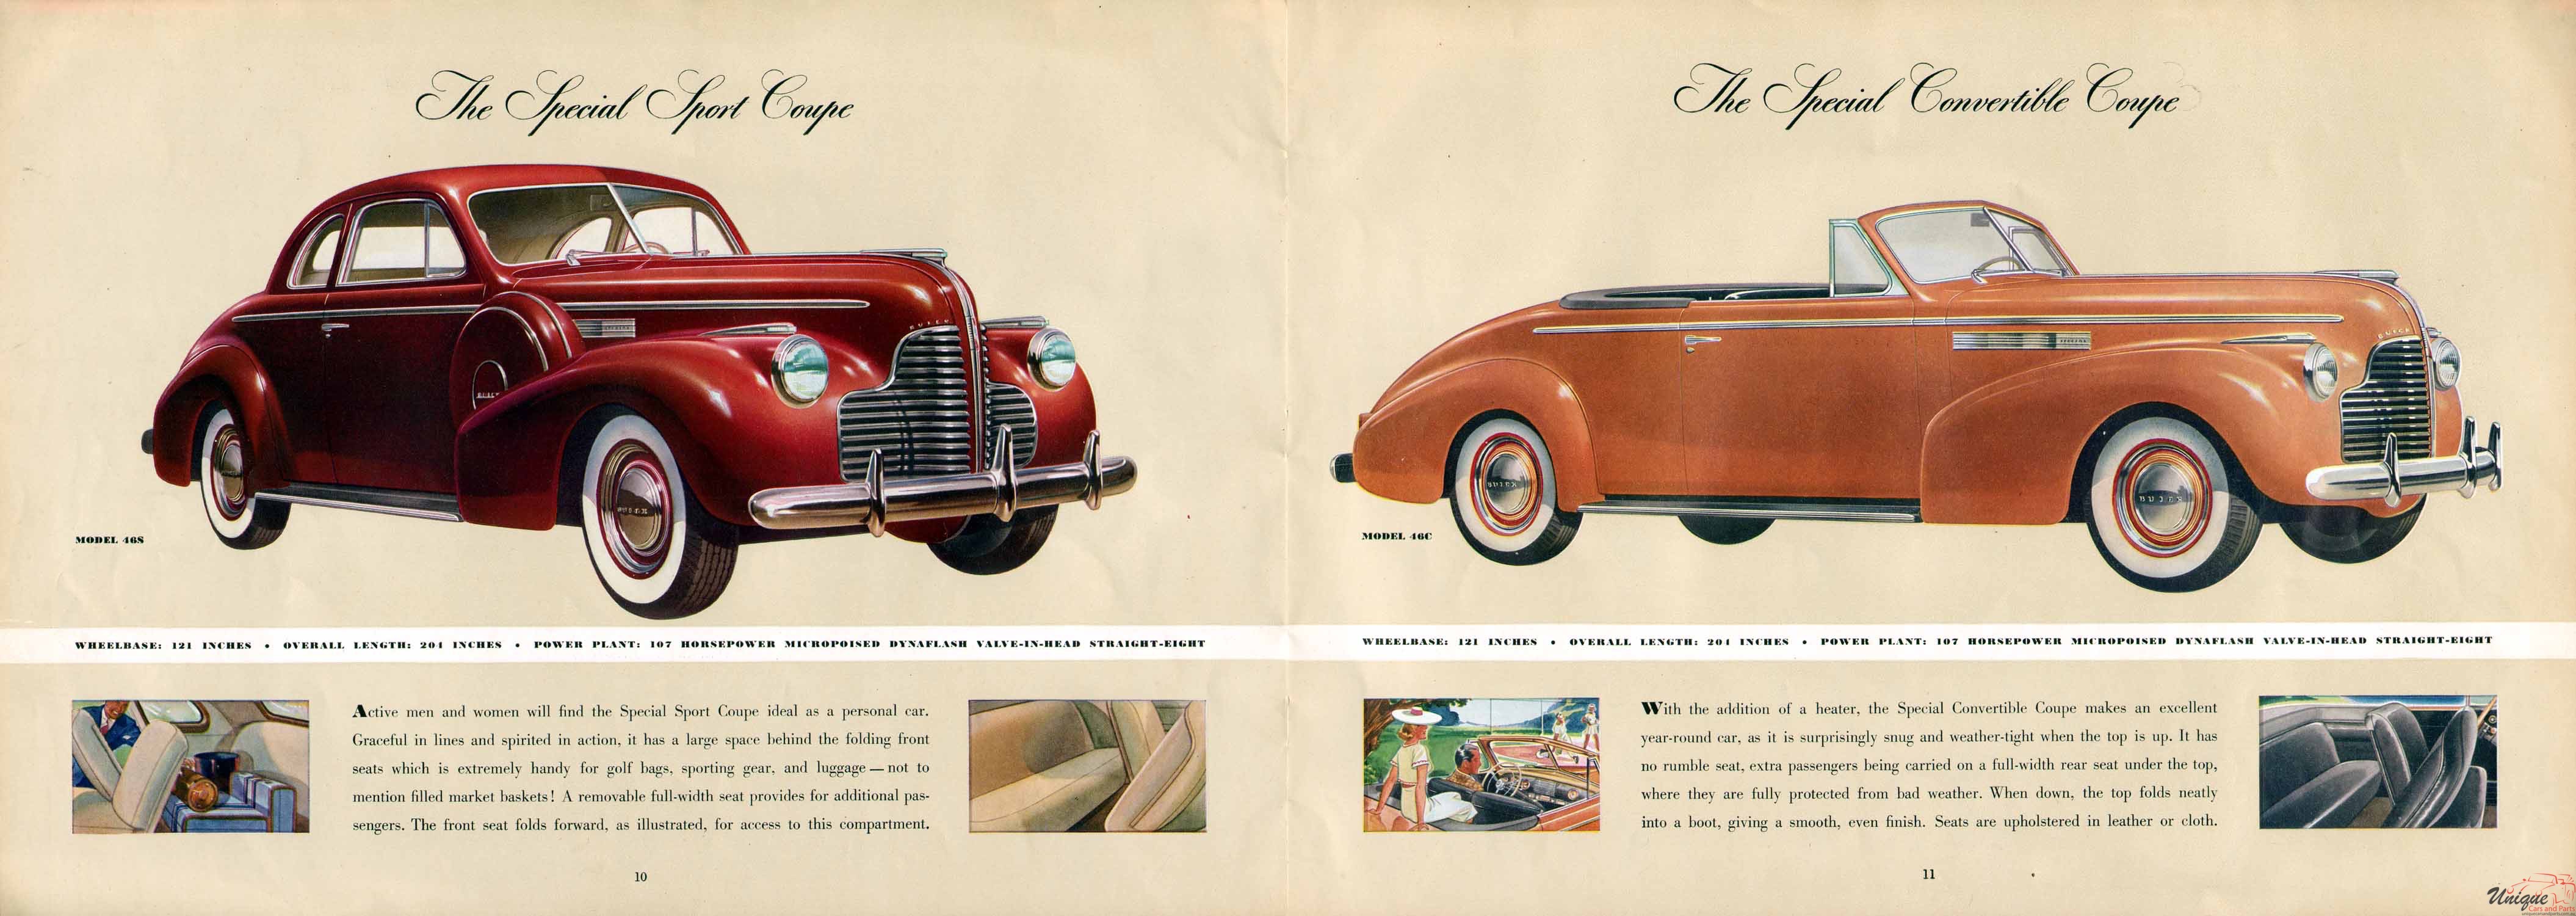 1940 Buick Brochure Page 10